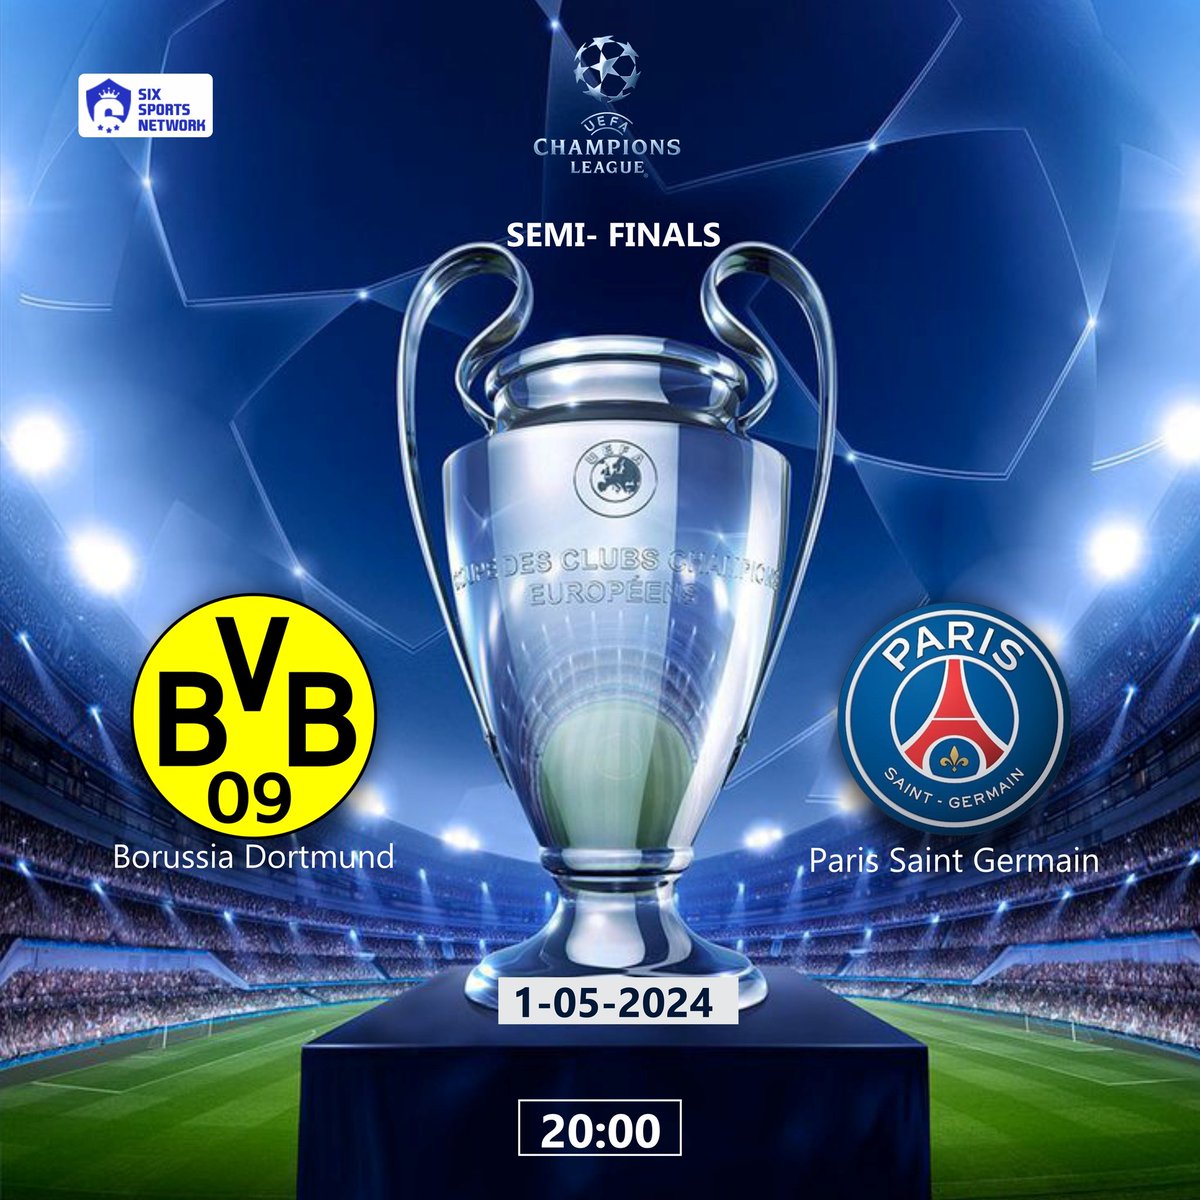 Dortmund vs PSG: A Battle for UCL Supremacy The stage is set for an epic clash at Signal Iduna Park as Borussia Dortmund hosts Paris Saint-Germain in the first leg of their UEFA Champions League semi-final. Who do you predict will emerge victorious tonight? #UCL #BVBPSG